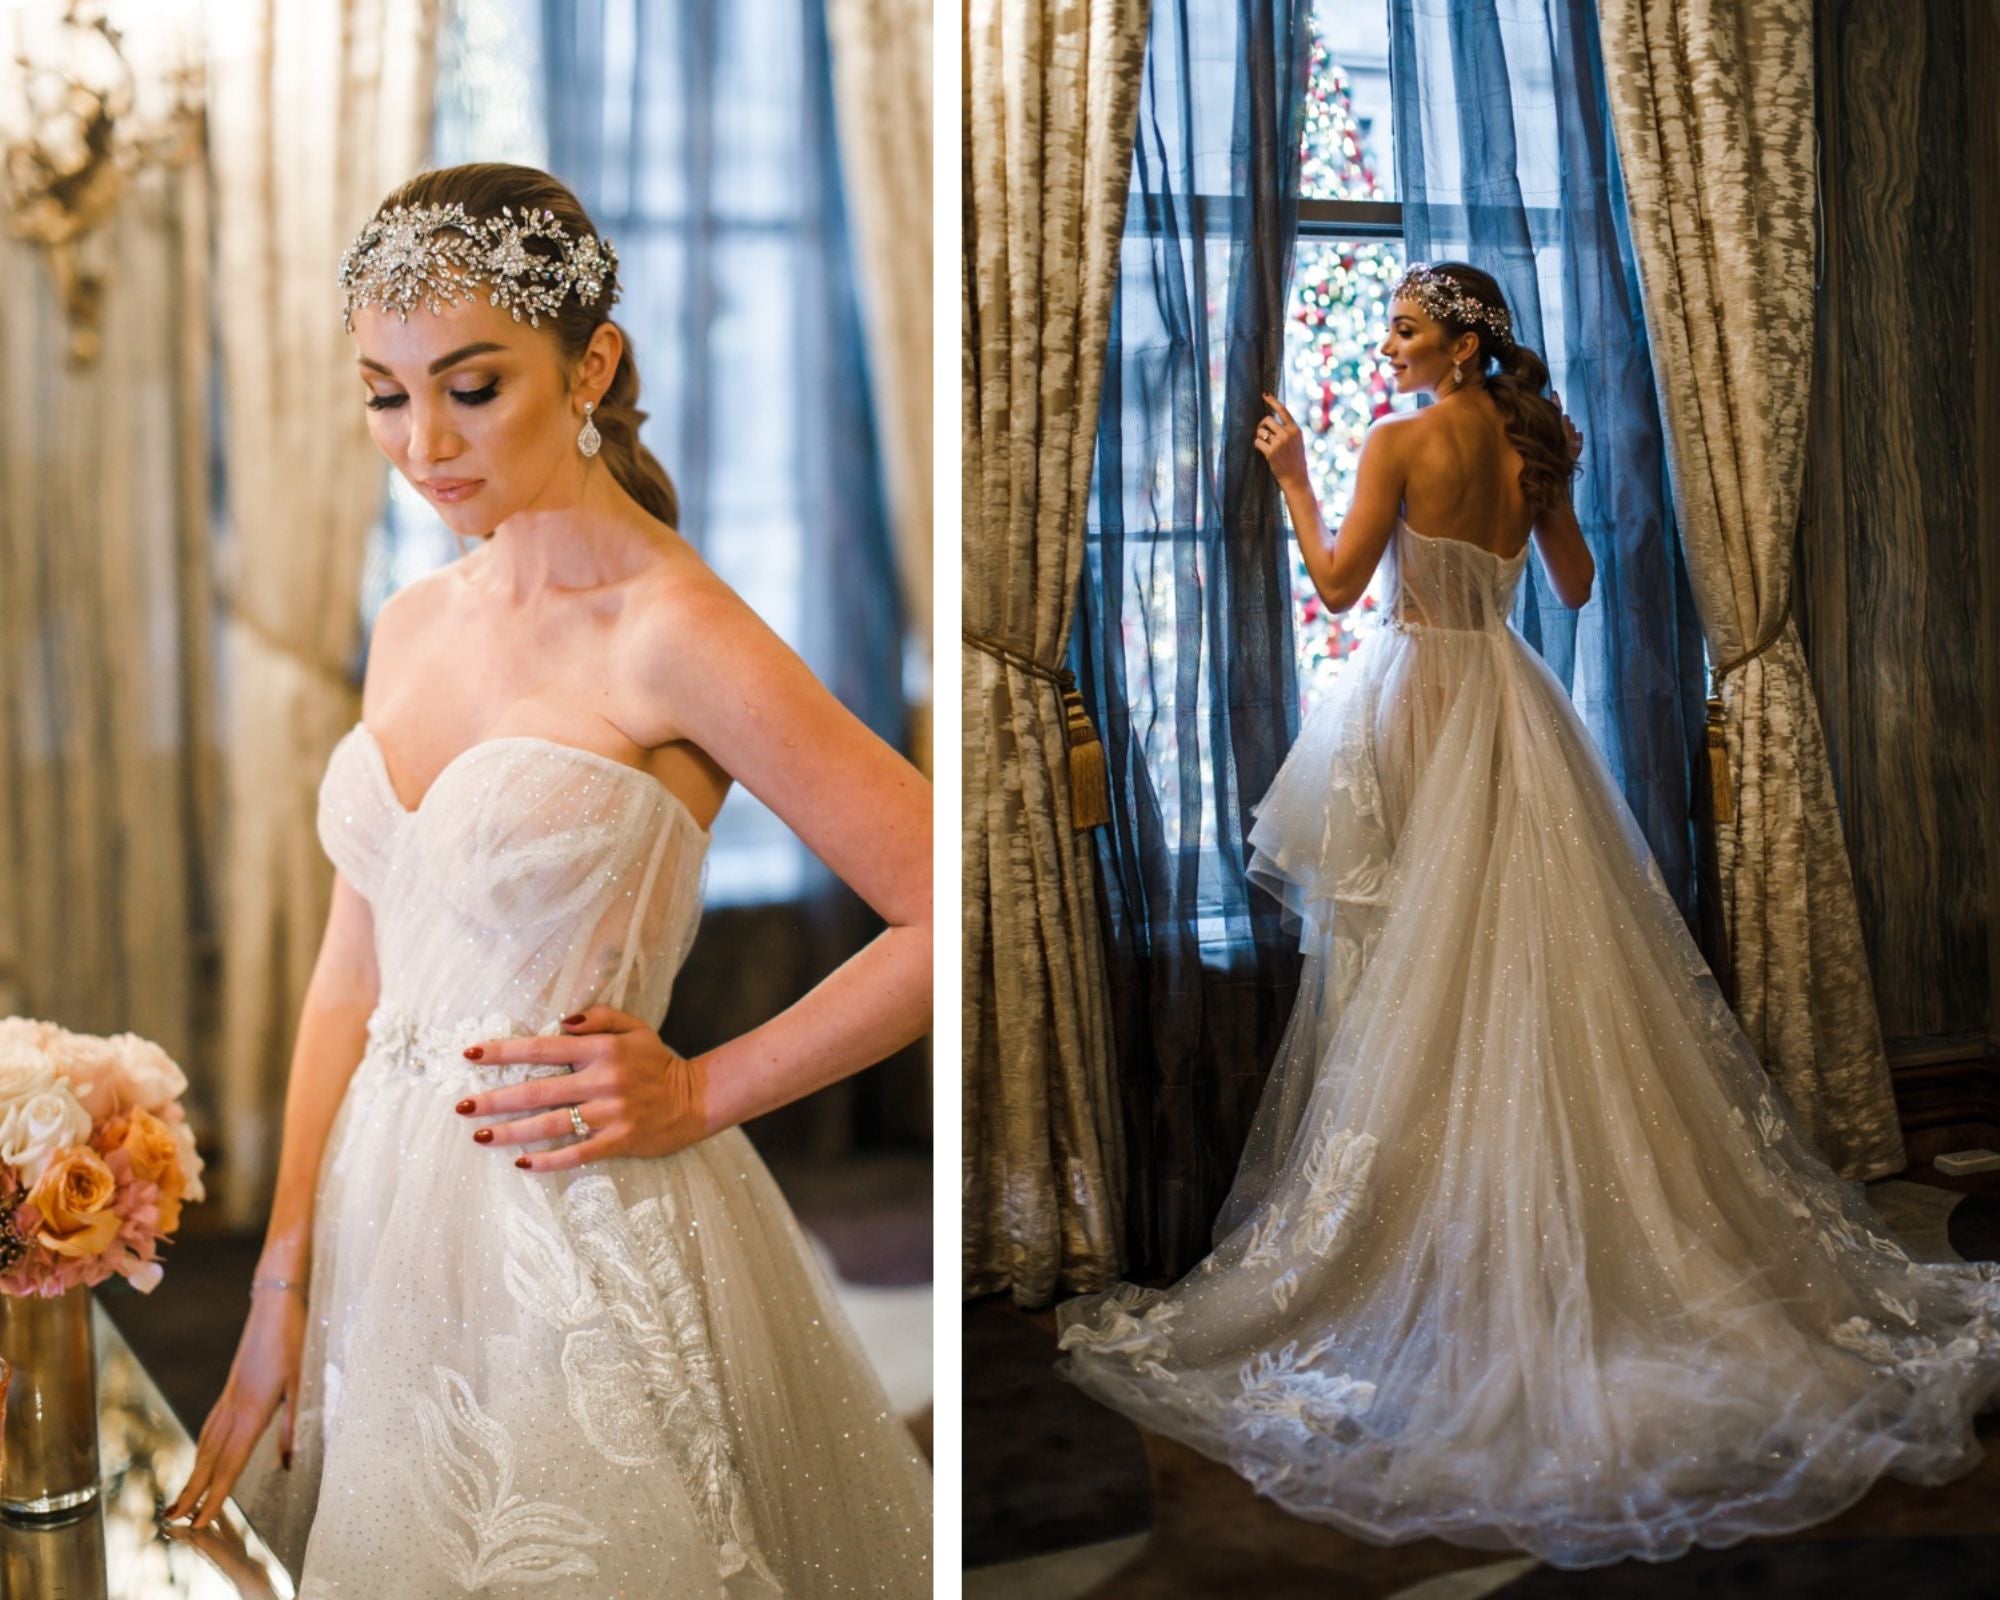 Marie Antoinette-inspired bridal style! This shoot features glam, lavish wedding, and bridal style ideas, like this regal bride wearing a fabulous wedding gown with a full, sheer train from Bridal Reflections NY, and a Swarovski crystal bridal hair vine and CZ drop earrings from Bridal Styles Boutique. Photography by Artvesta Studio.